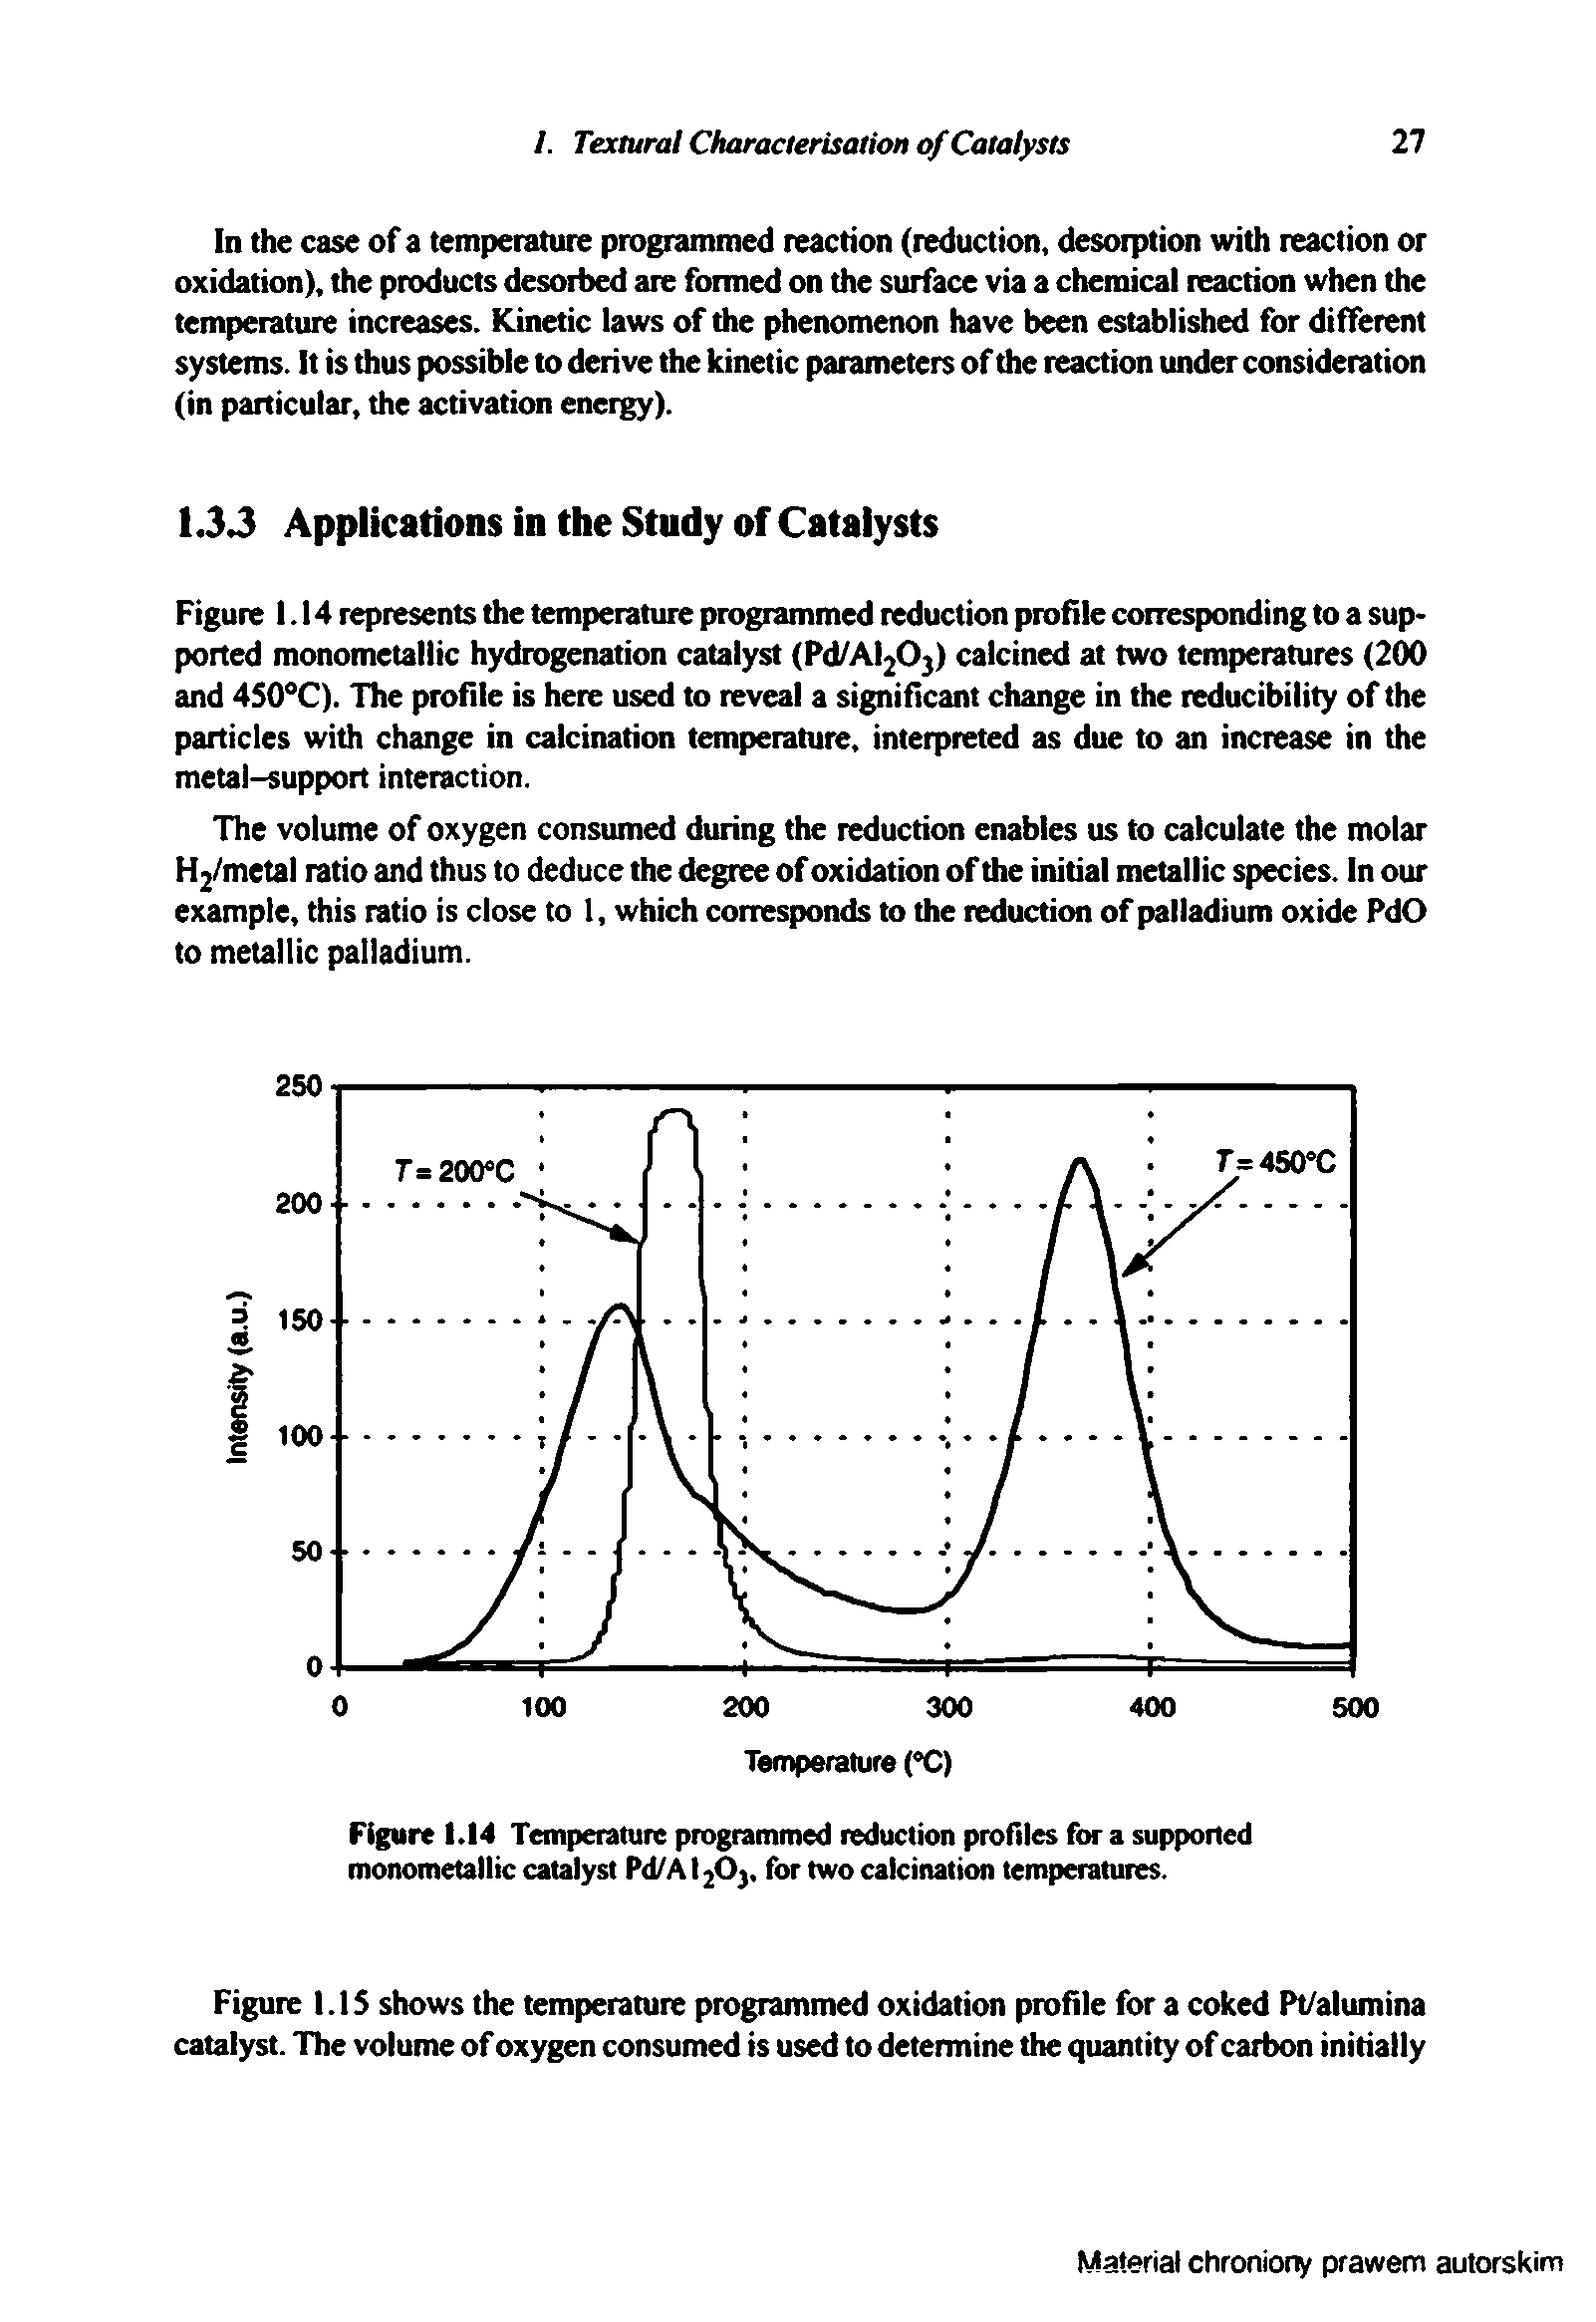 Figure 1,14 Temperature programmed reduction profiles for a supported monometallic catalyst Pd/Al203, for two calcination temperatures.